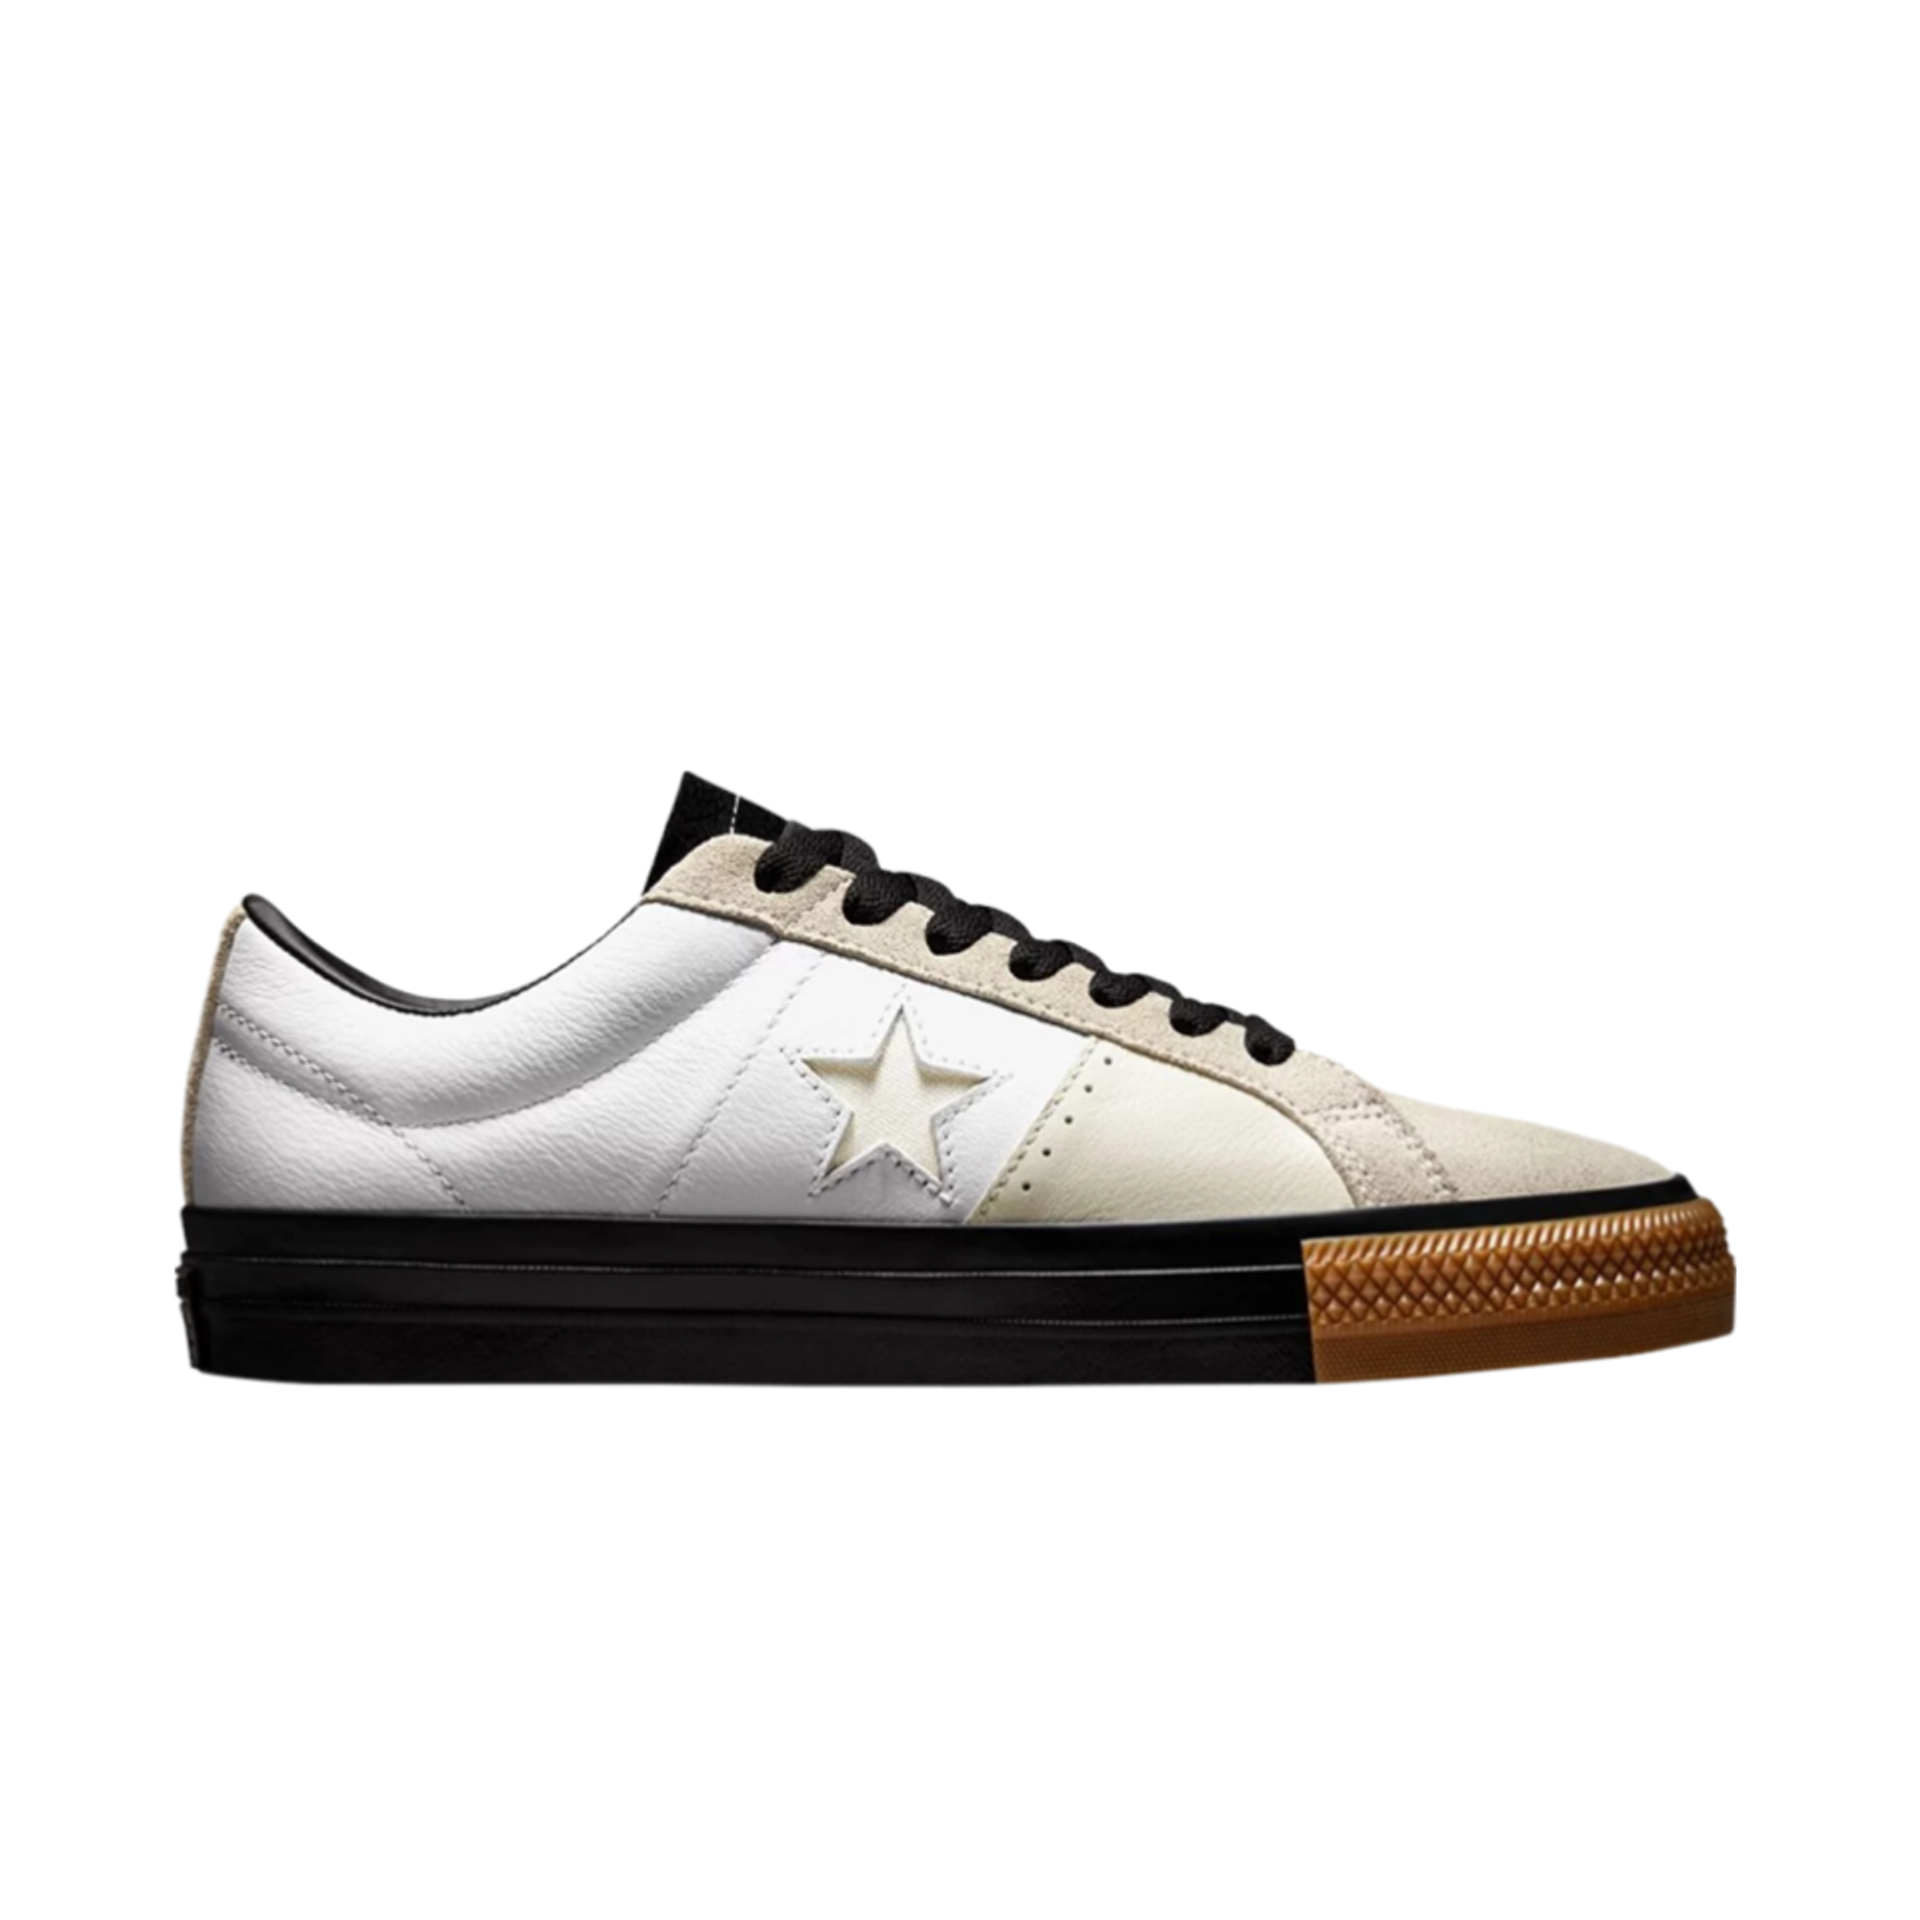 Converse Carhartt WIP x One Star Pro Cons Low 'White Black'